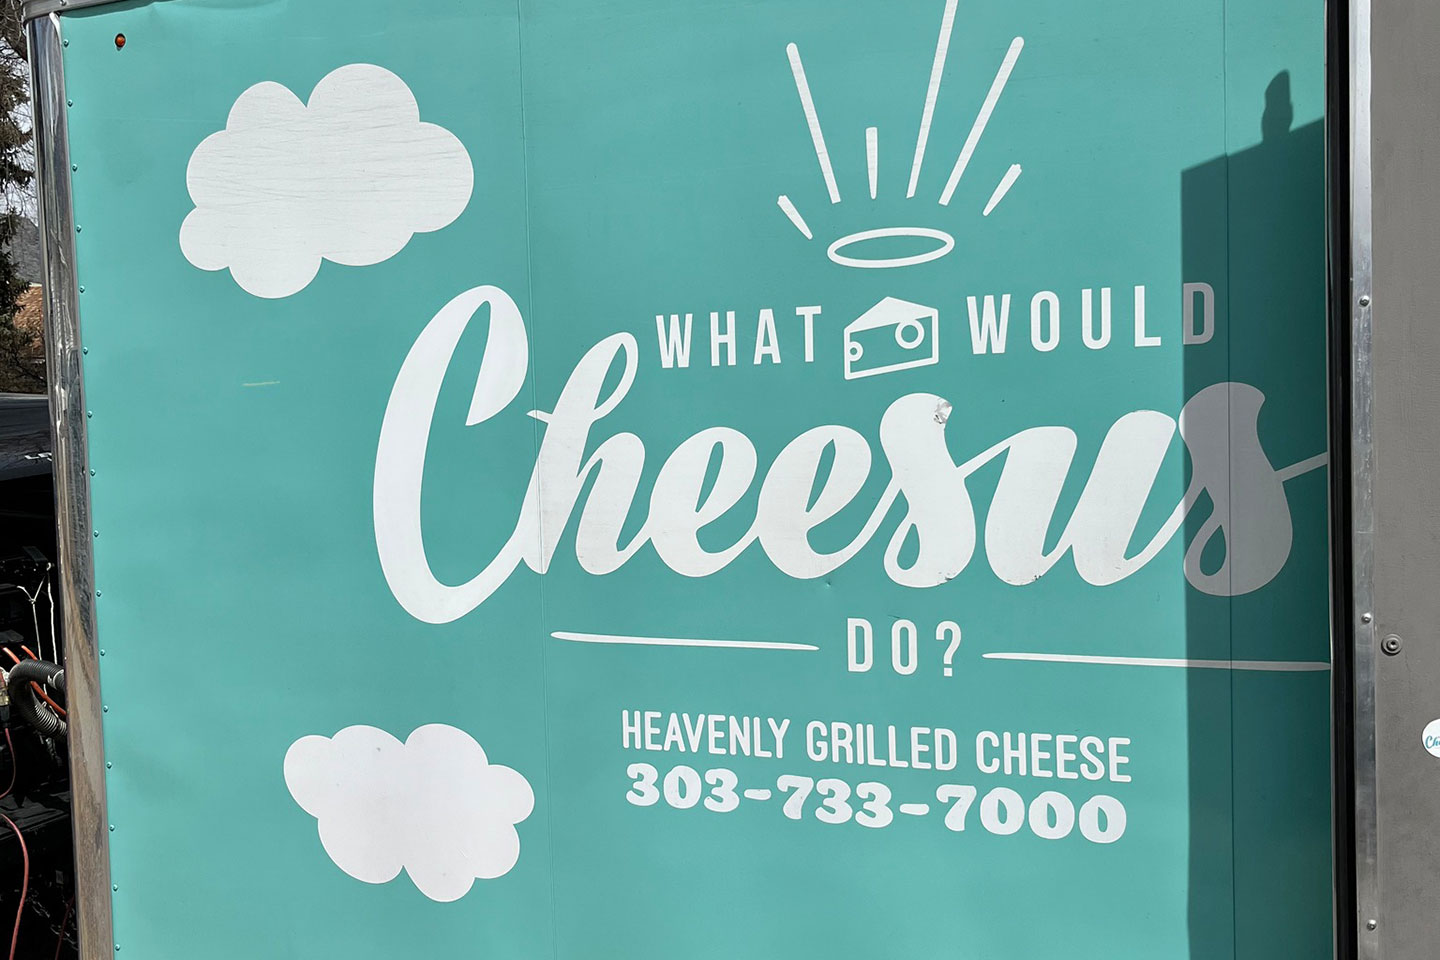 A grilled cheese sandwich is a beautiful thing. Made with the finest cheese and crafted with love, we want to bring you the grilled cheese sandwich of your dreams.
http://whatwouldcheesusdo.com